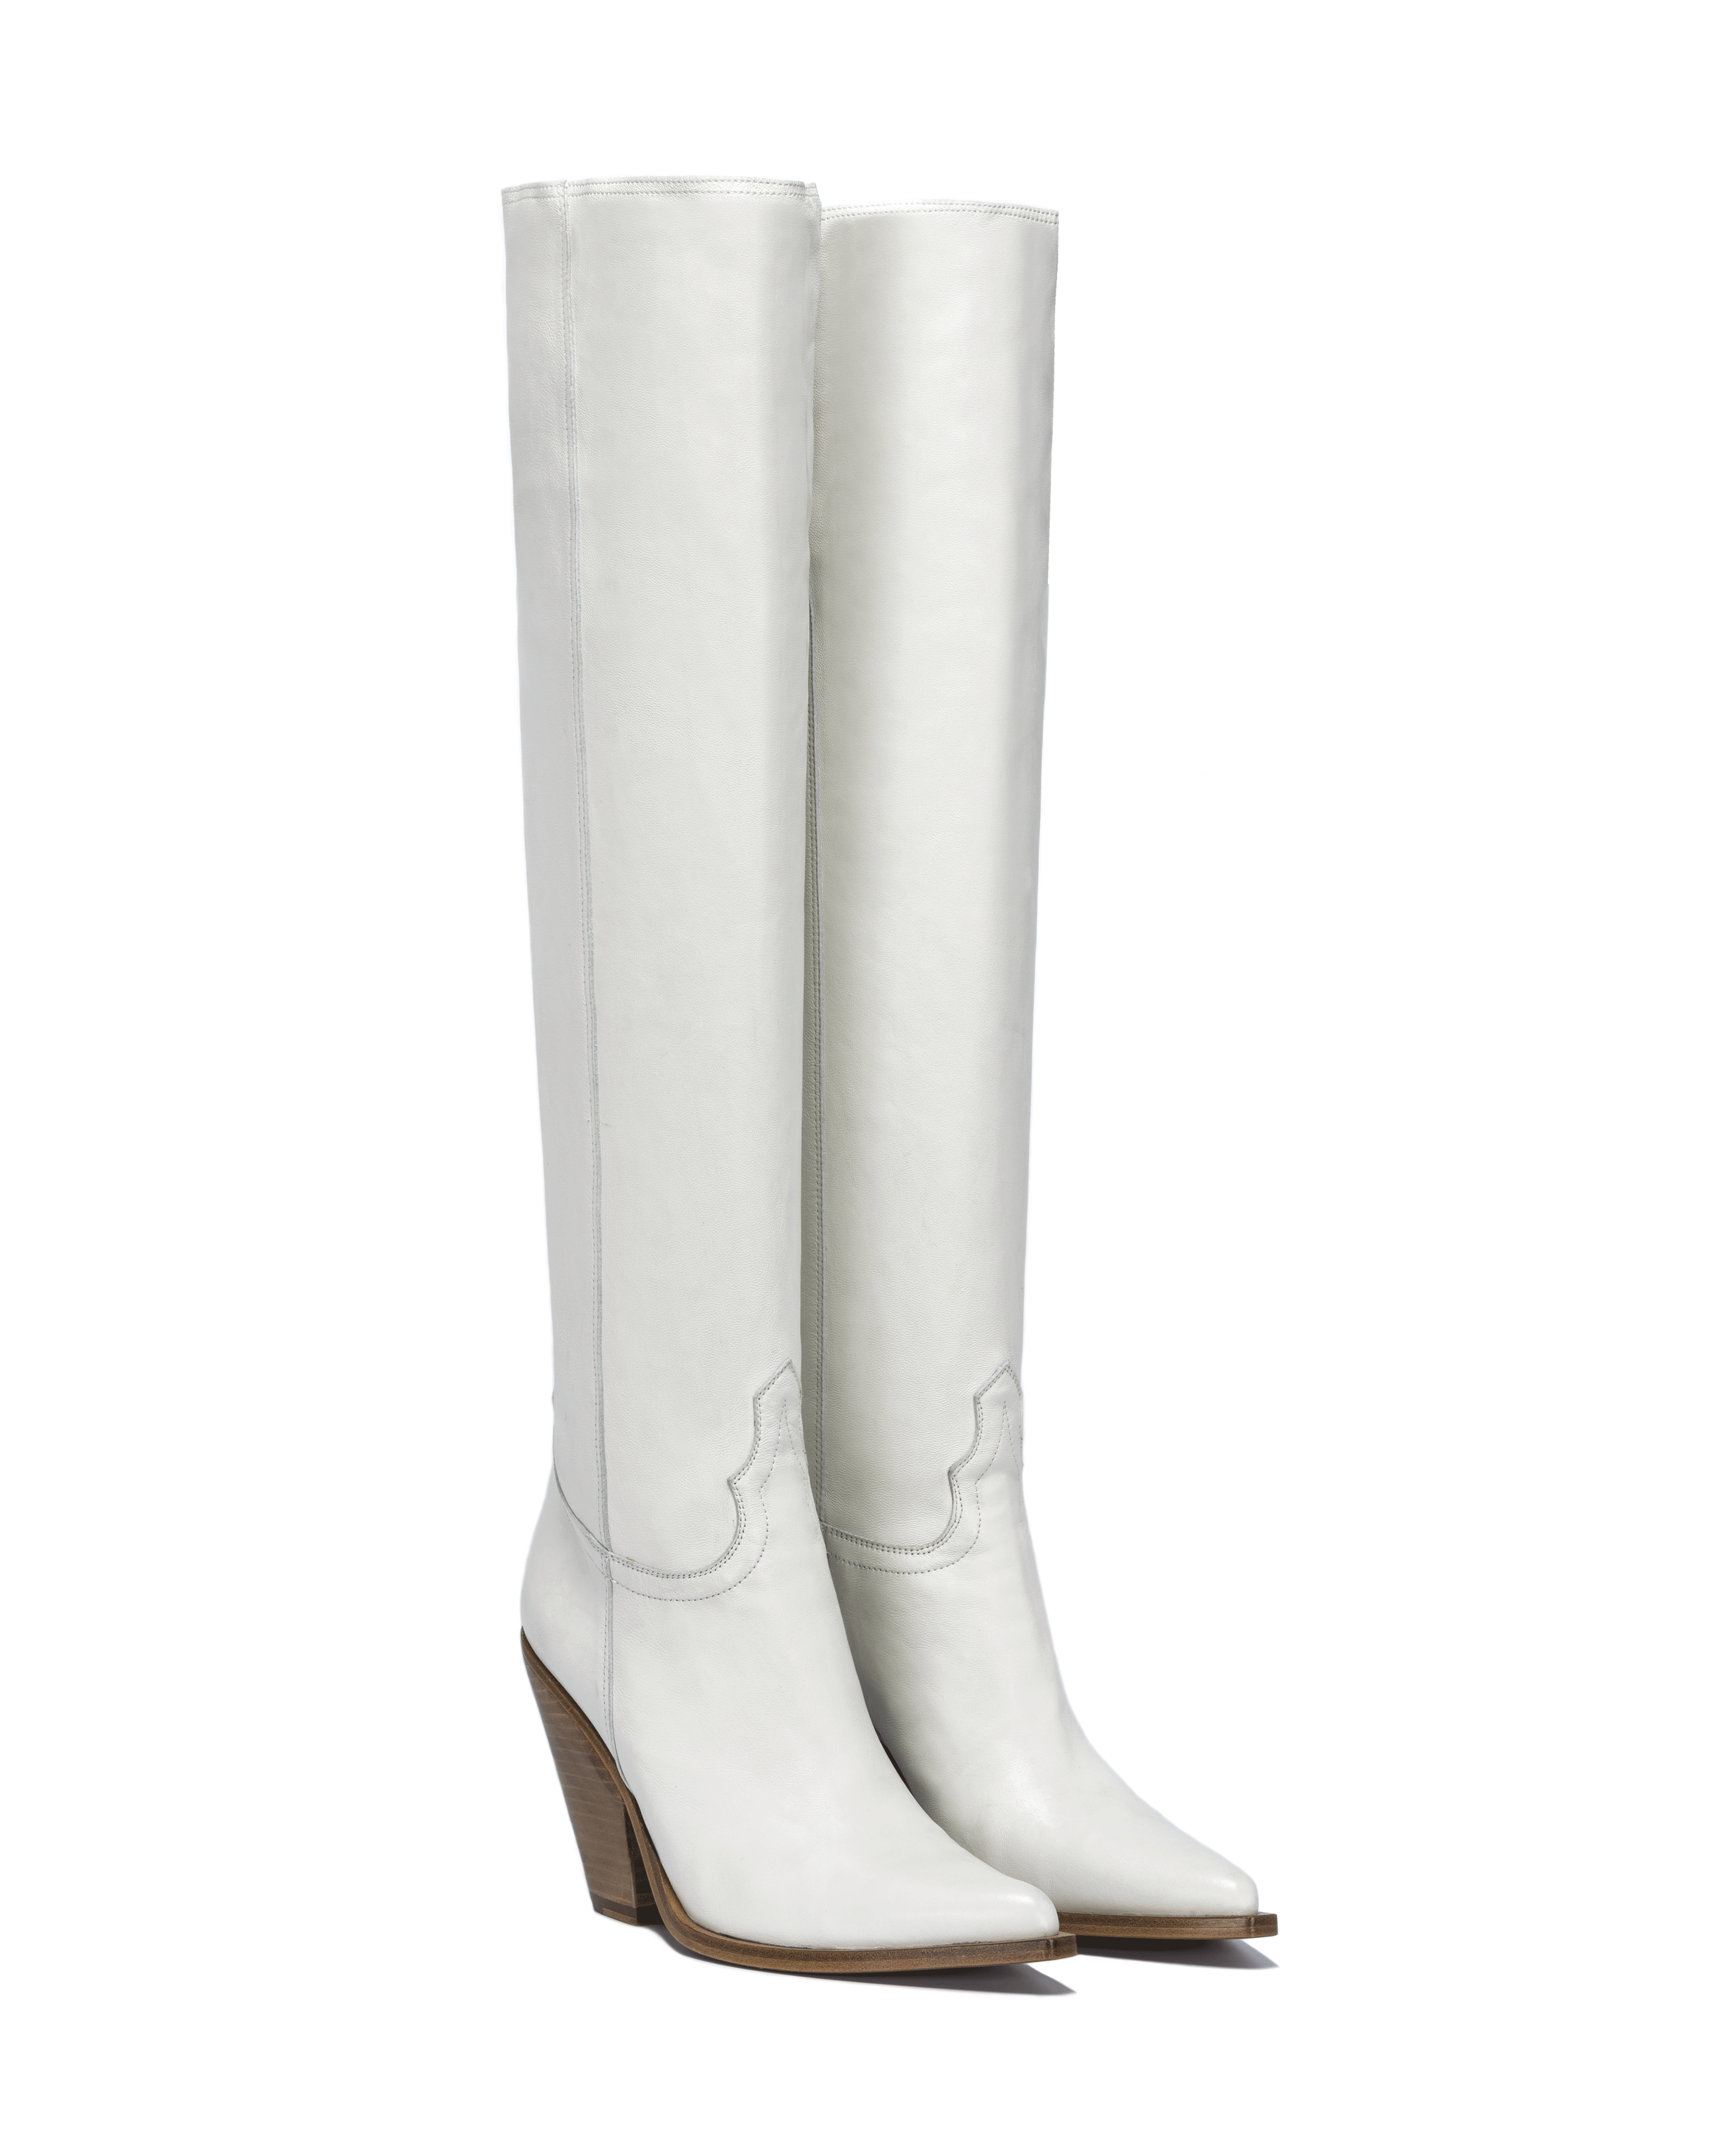 ACAPULCO Women's Knee Boots in White Nappa_01_Side